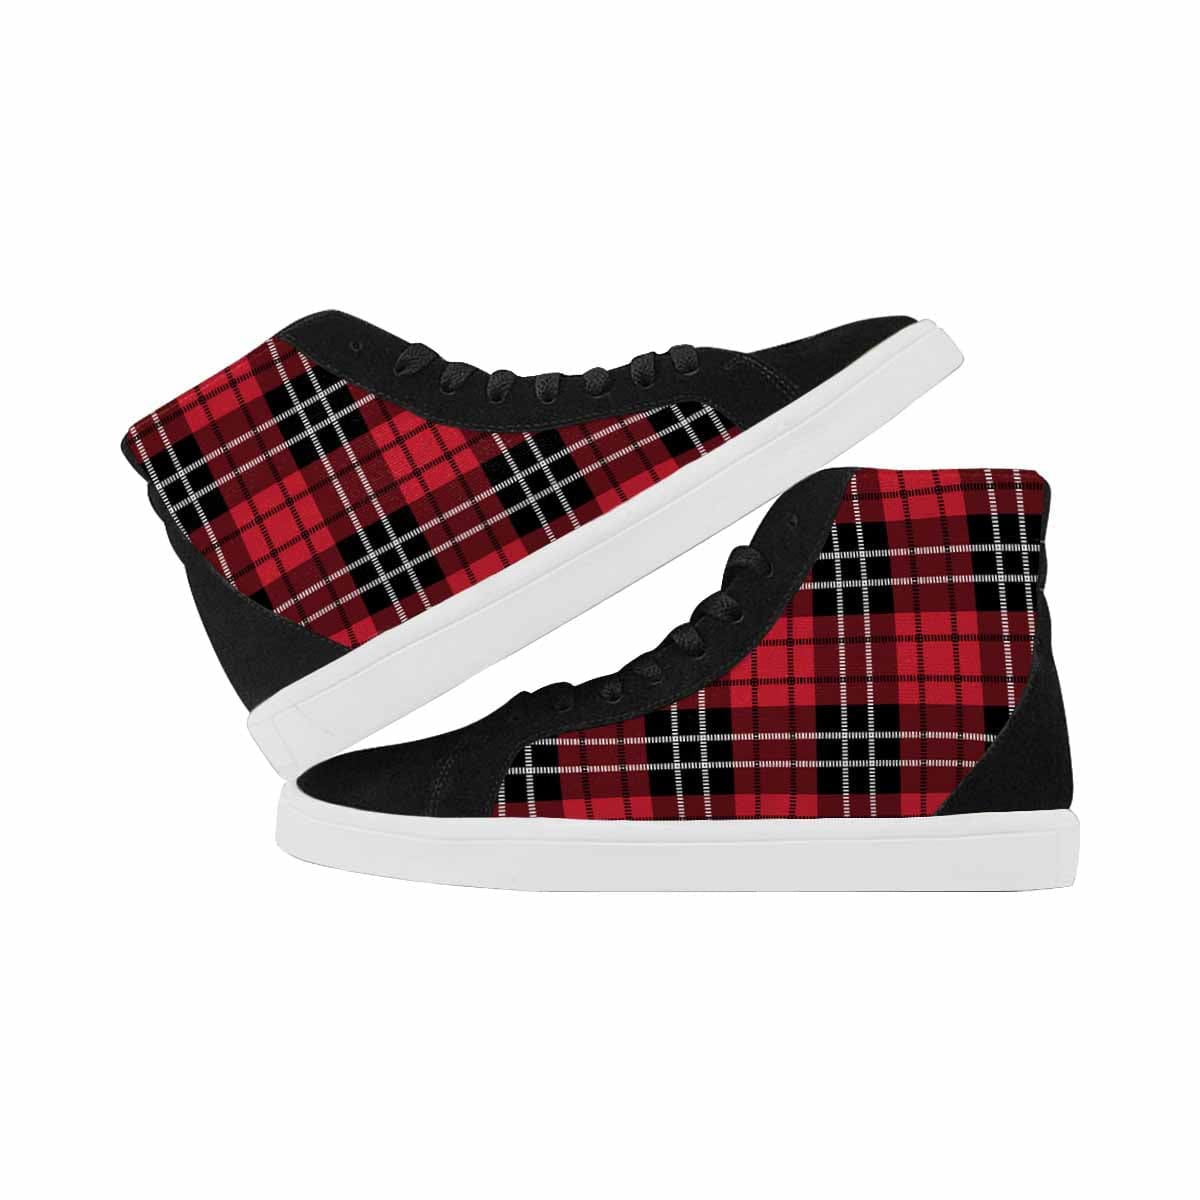 Sneakers For Women, Buffalo Plaid Red And Black - High Top Sports Shoes-3